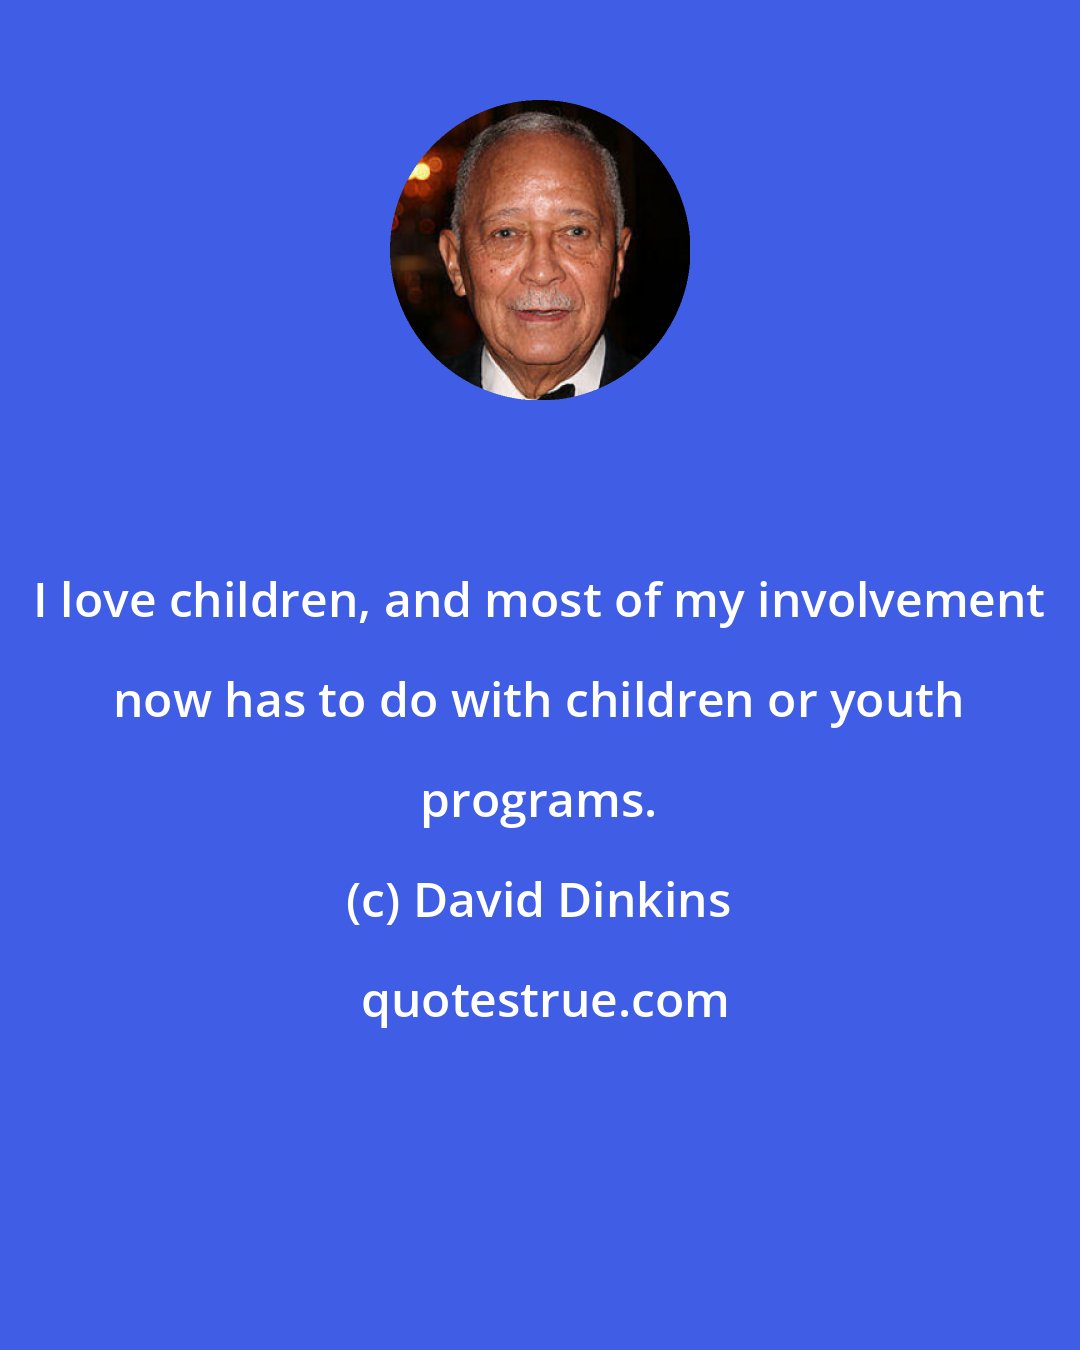 David Dinkins: I love children, and most of my involvement now has to do with children or youth programs.